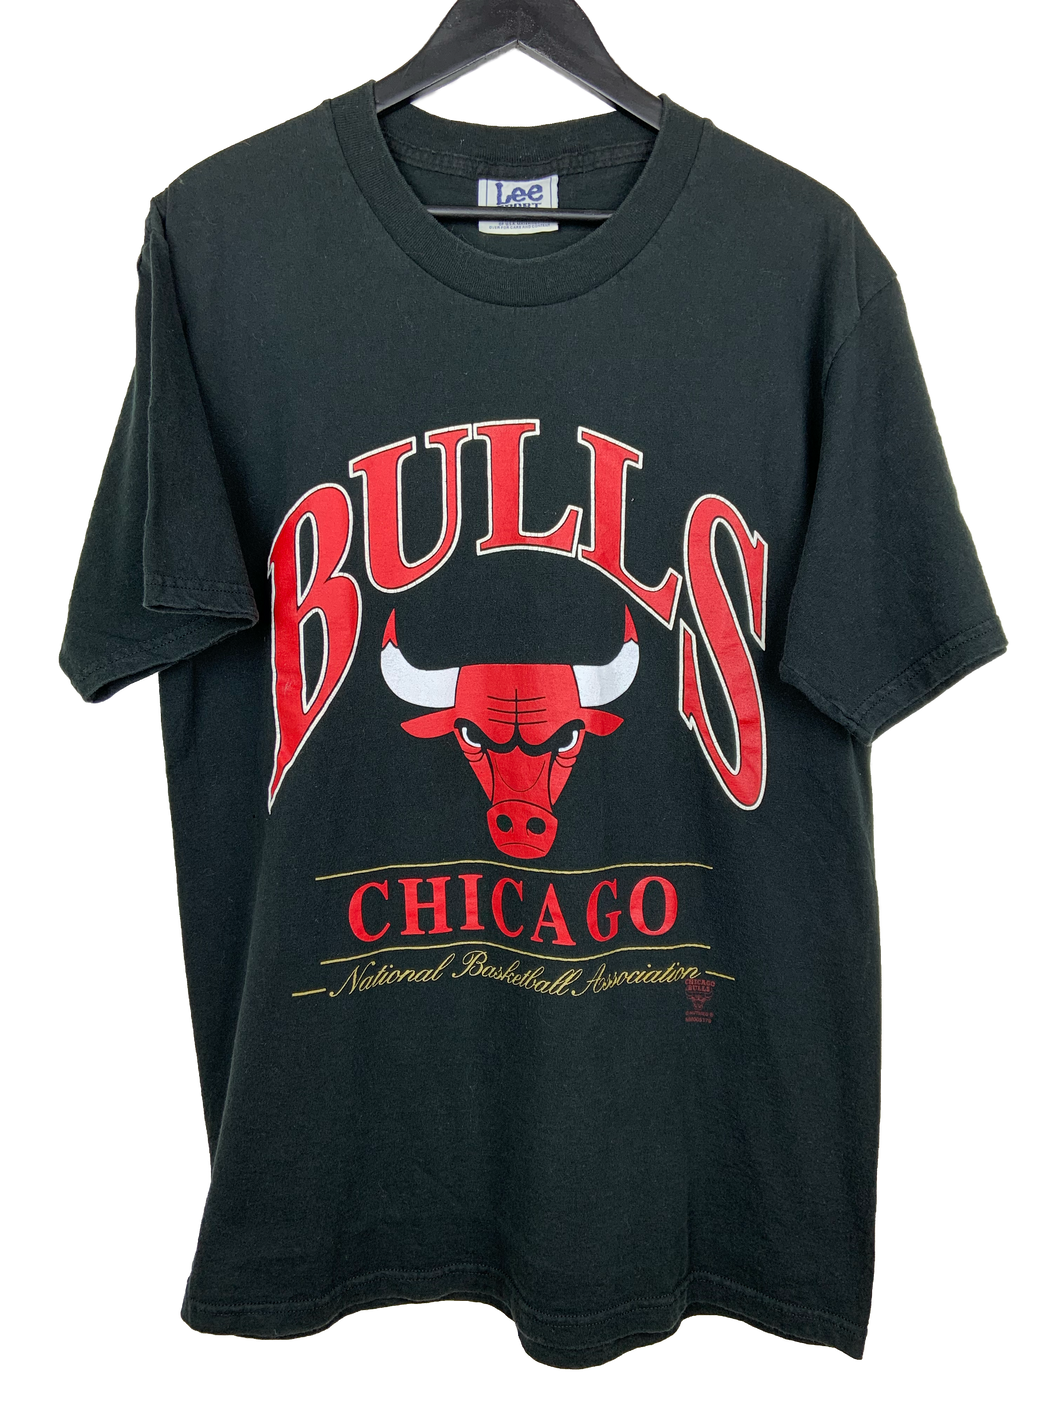 CHICAGO BULLS SPELLOUT TEE - LARGE